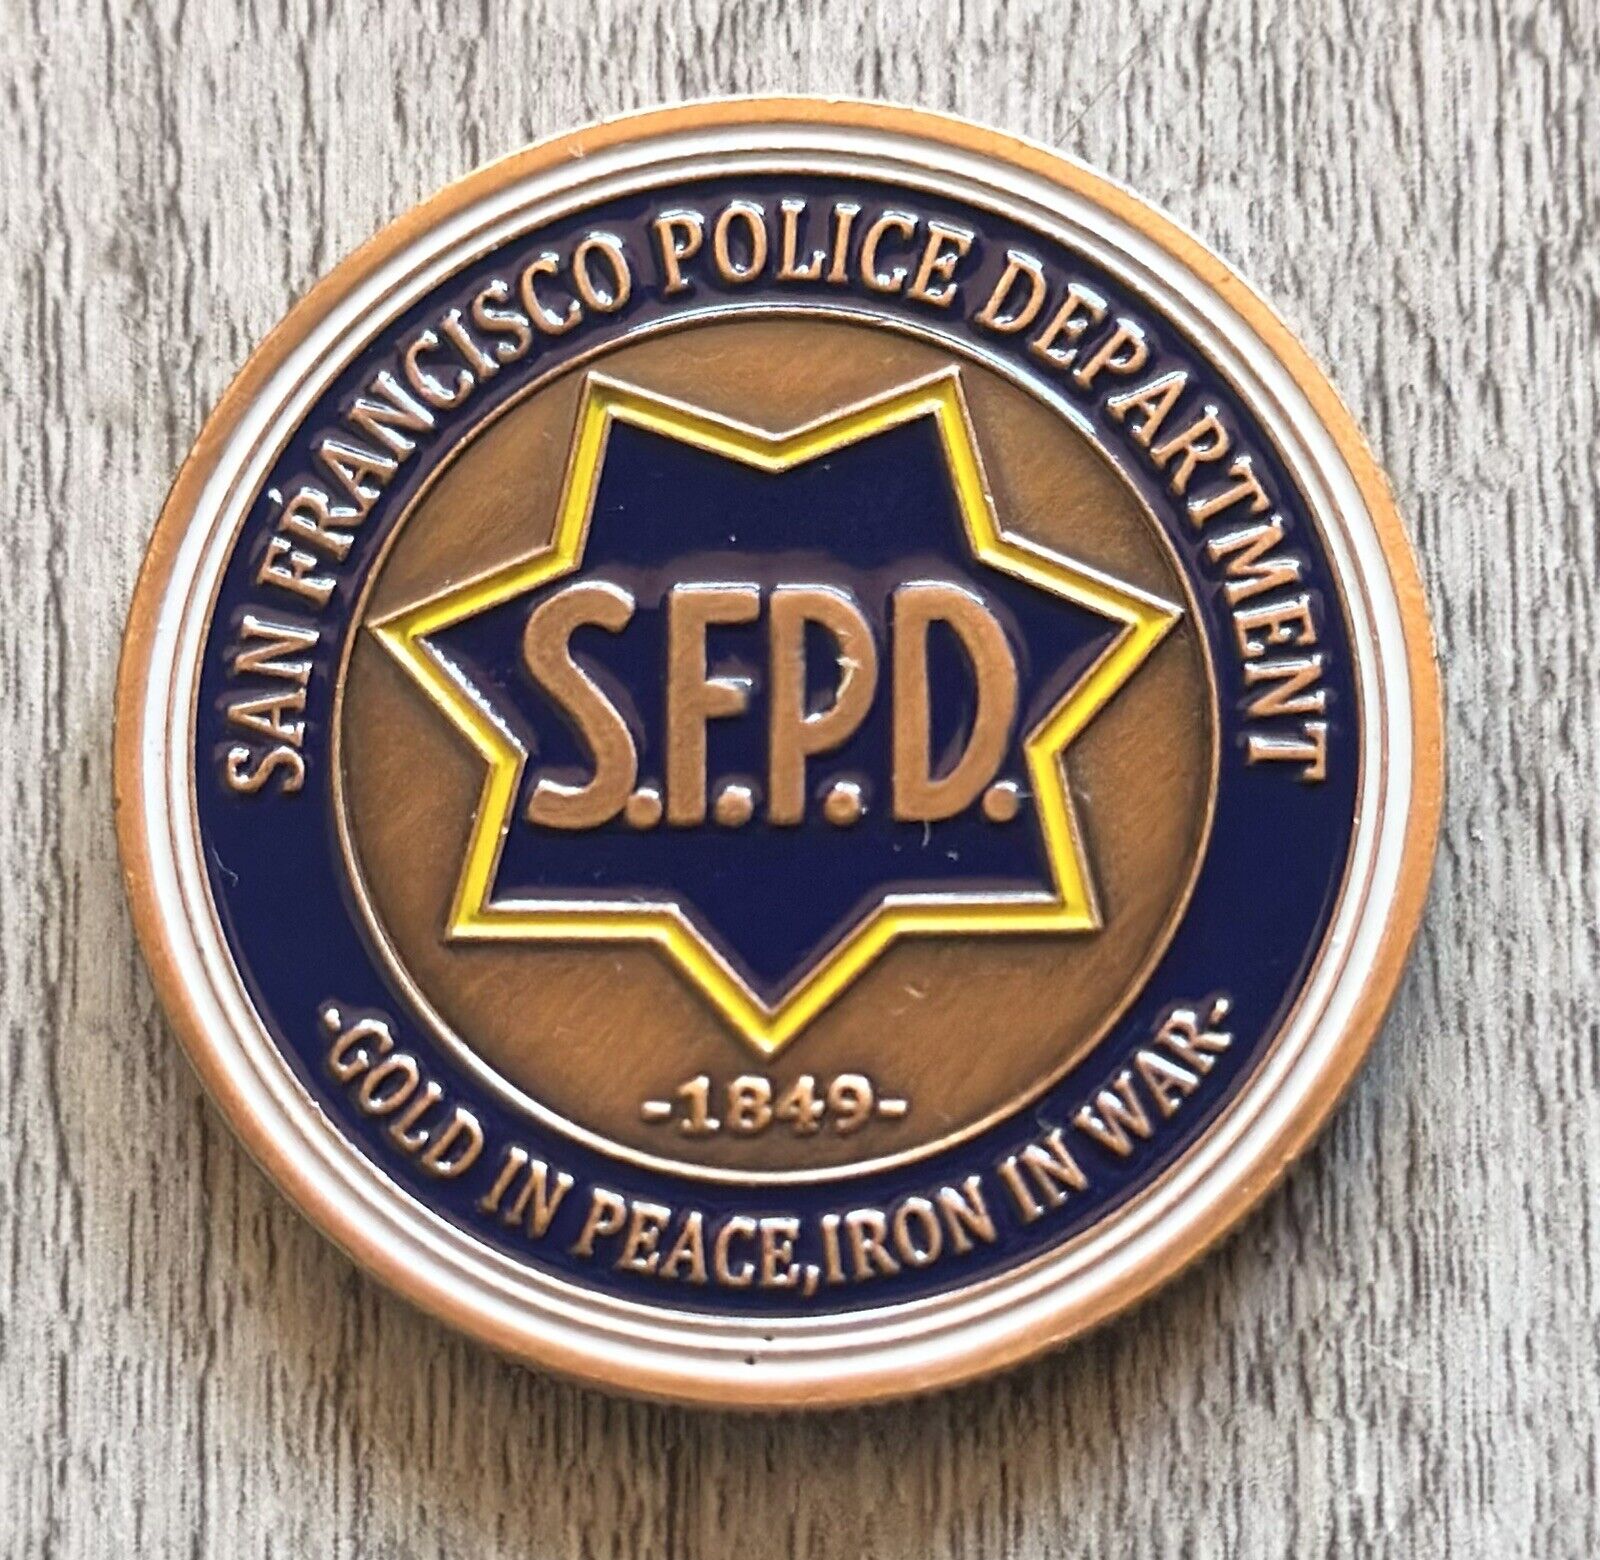 San Francisco SFPD POLICE DEPARTMENT Bronzed FINISH Challenge Coin, New